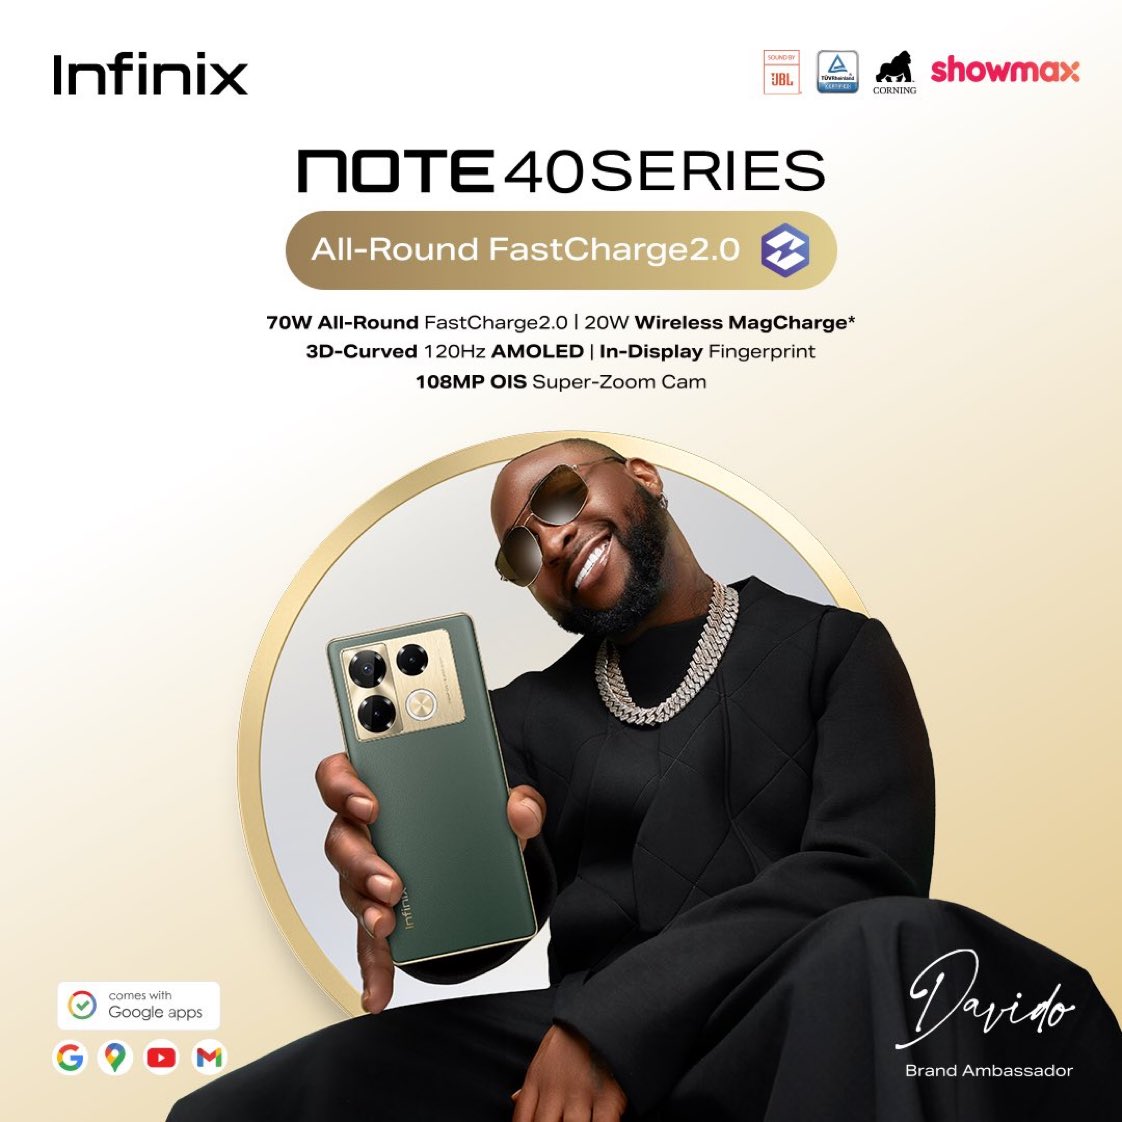 Infinix Note 40 pro is simply exquisite! Don’t sleep on it.

#TakeChargeWithNote40